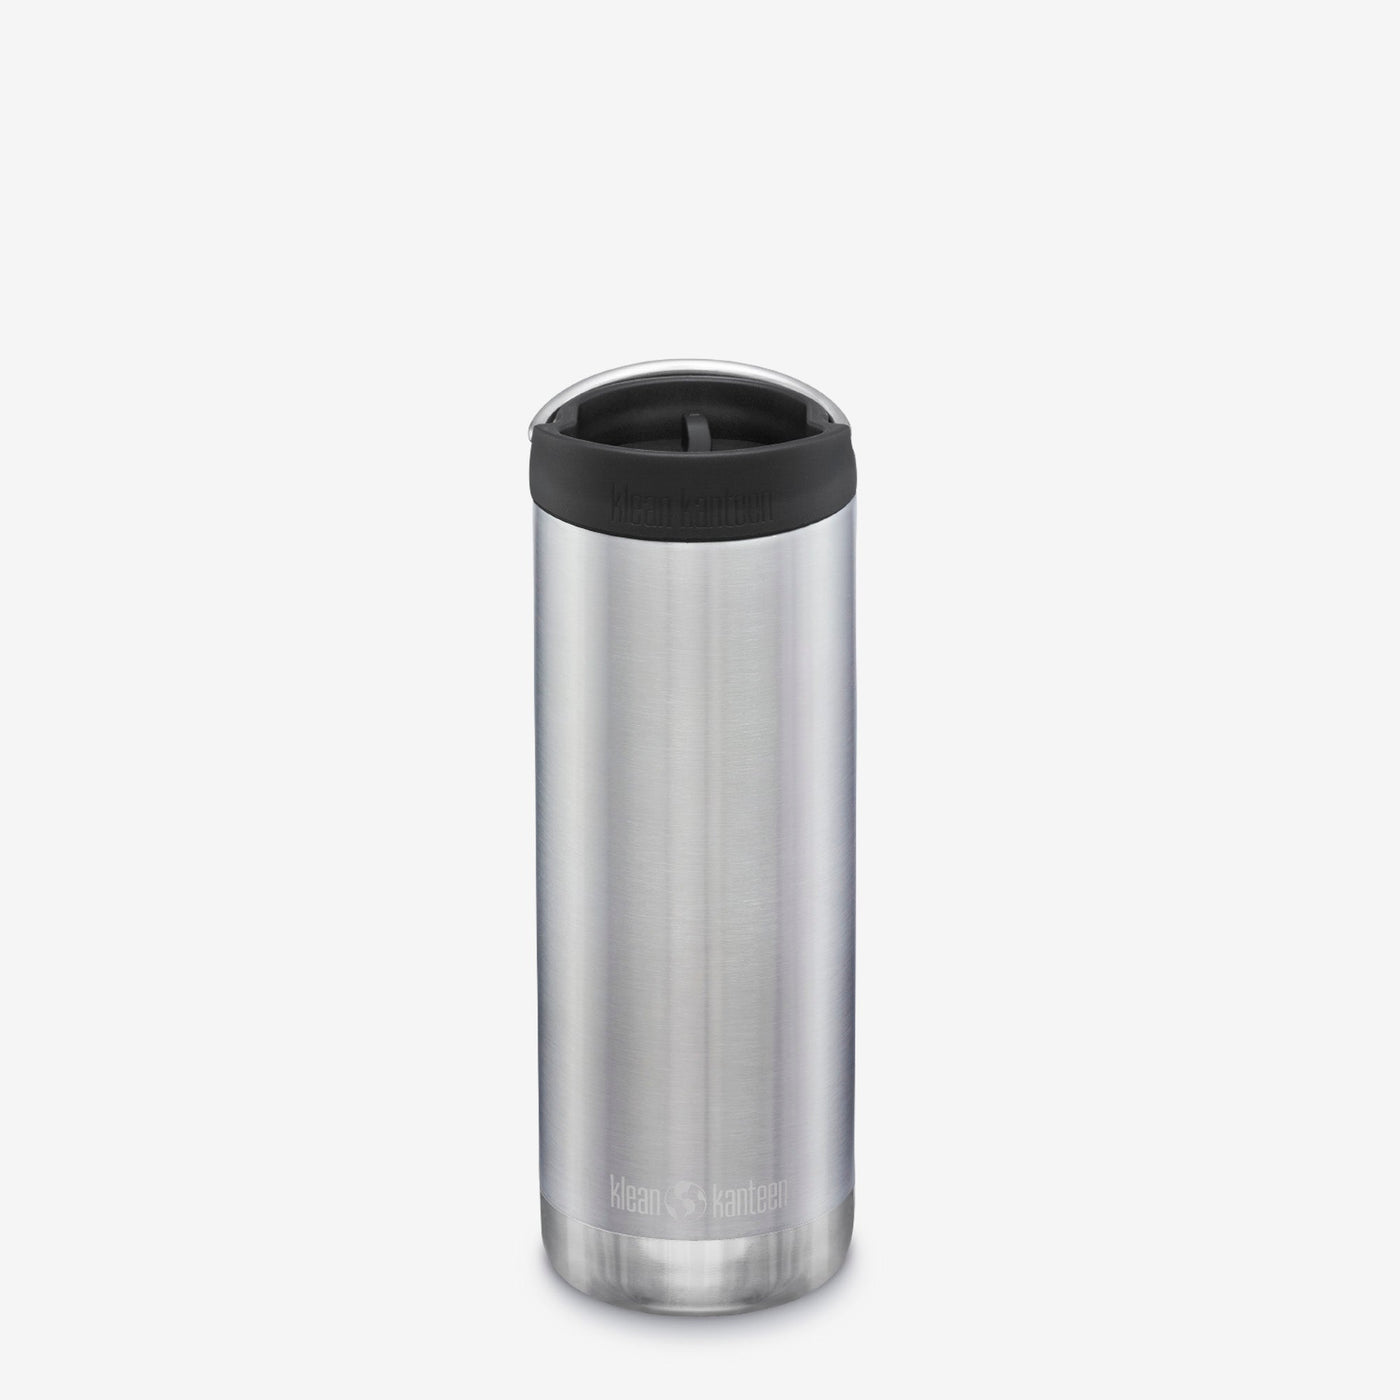 16 oz Coffee Mug and Water Bottle - Brushed Stainless